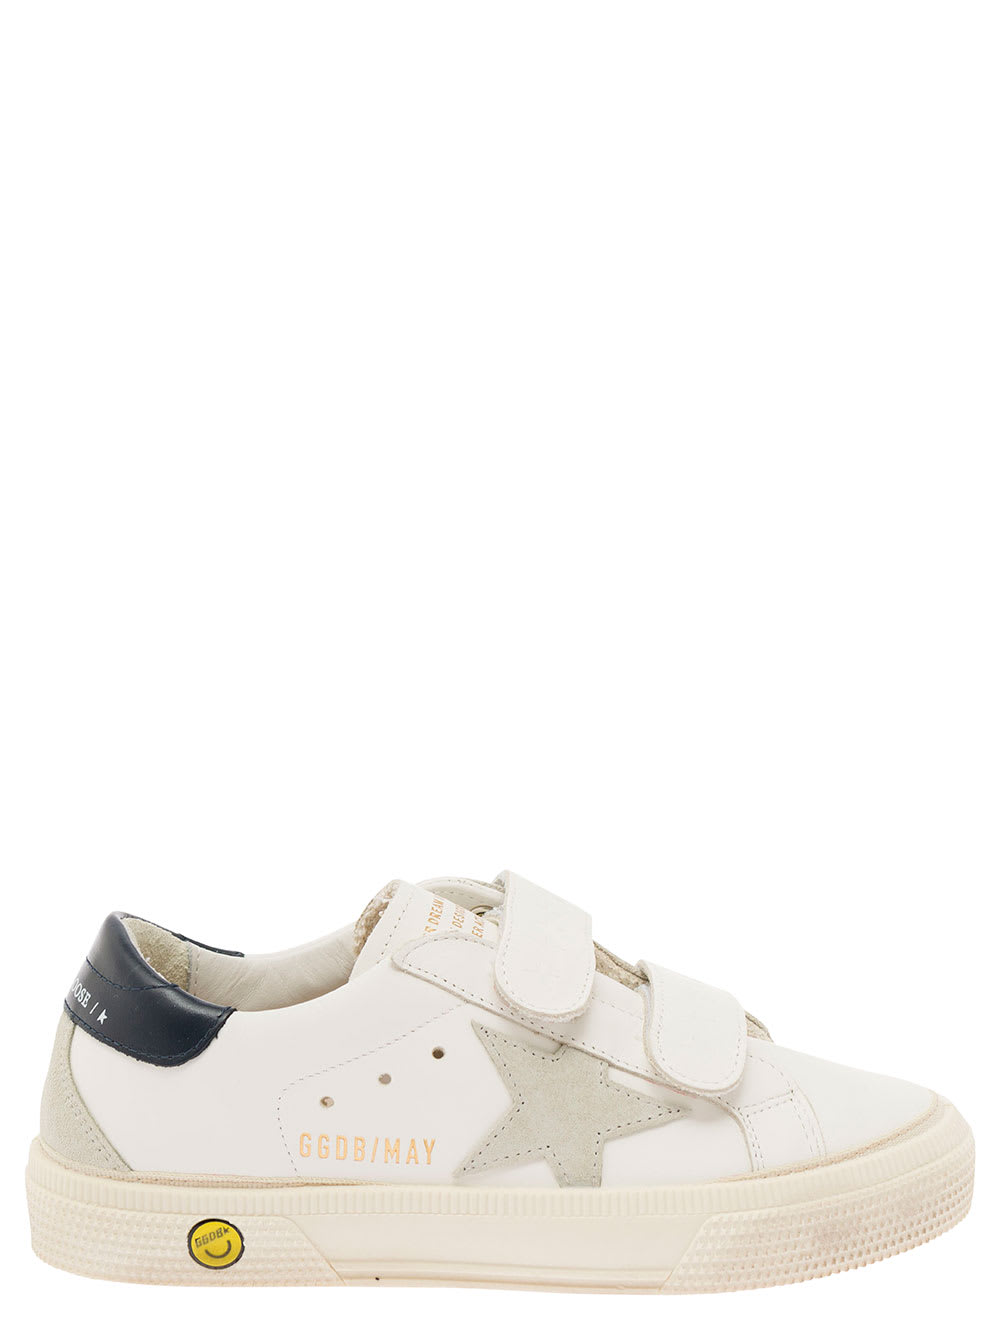 Golden Goose Kids' May School Leather Upper And Heel Suede Star And Spur Include Stesso Codice Gyf In White